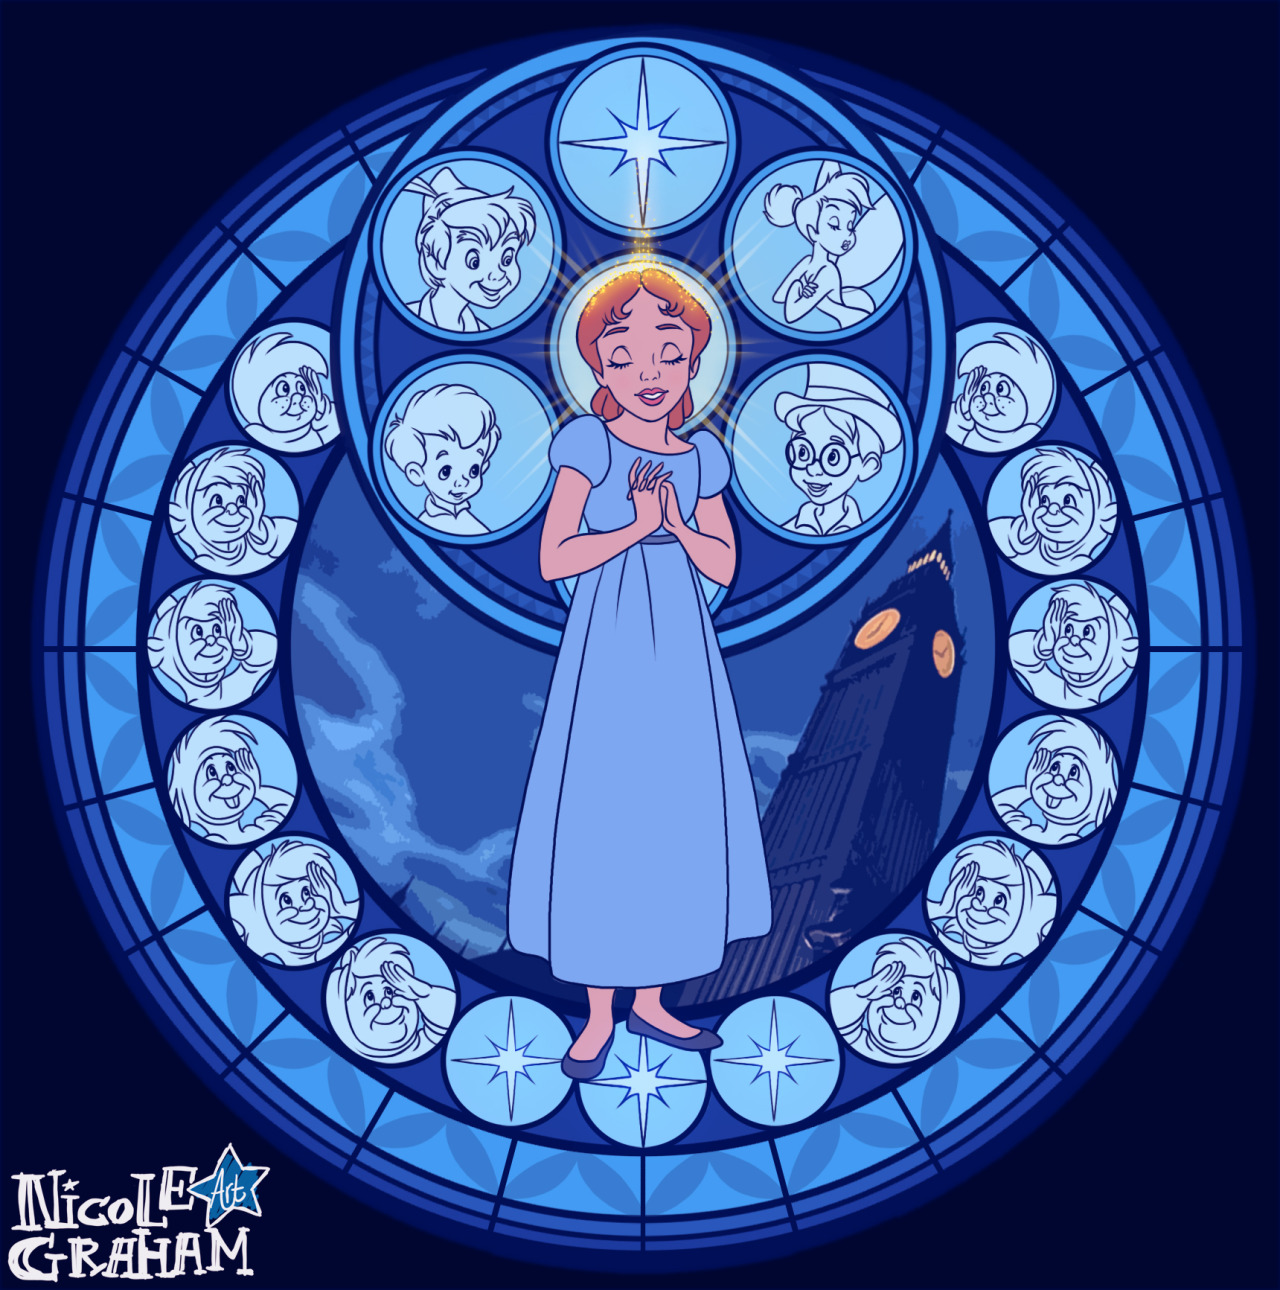 Stained glass disney characters